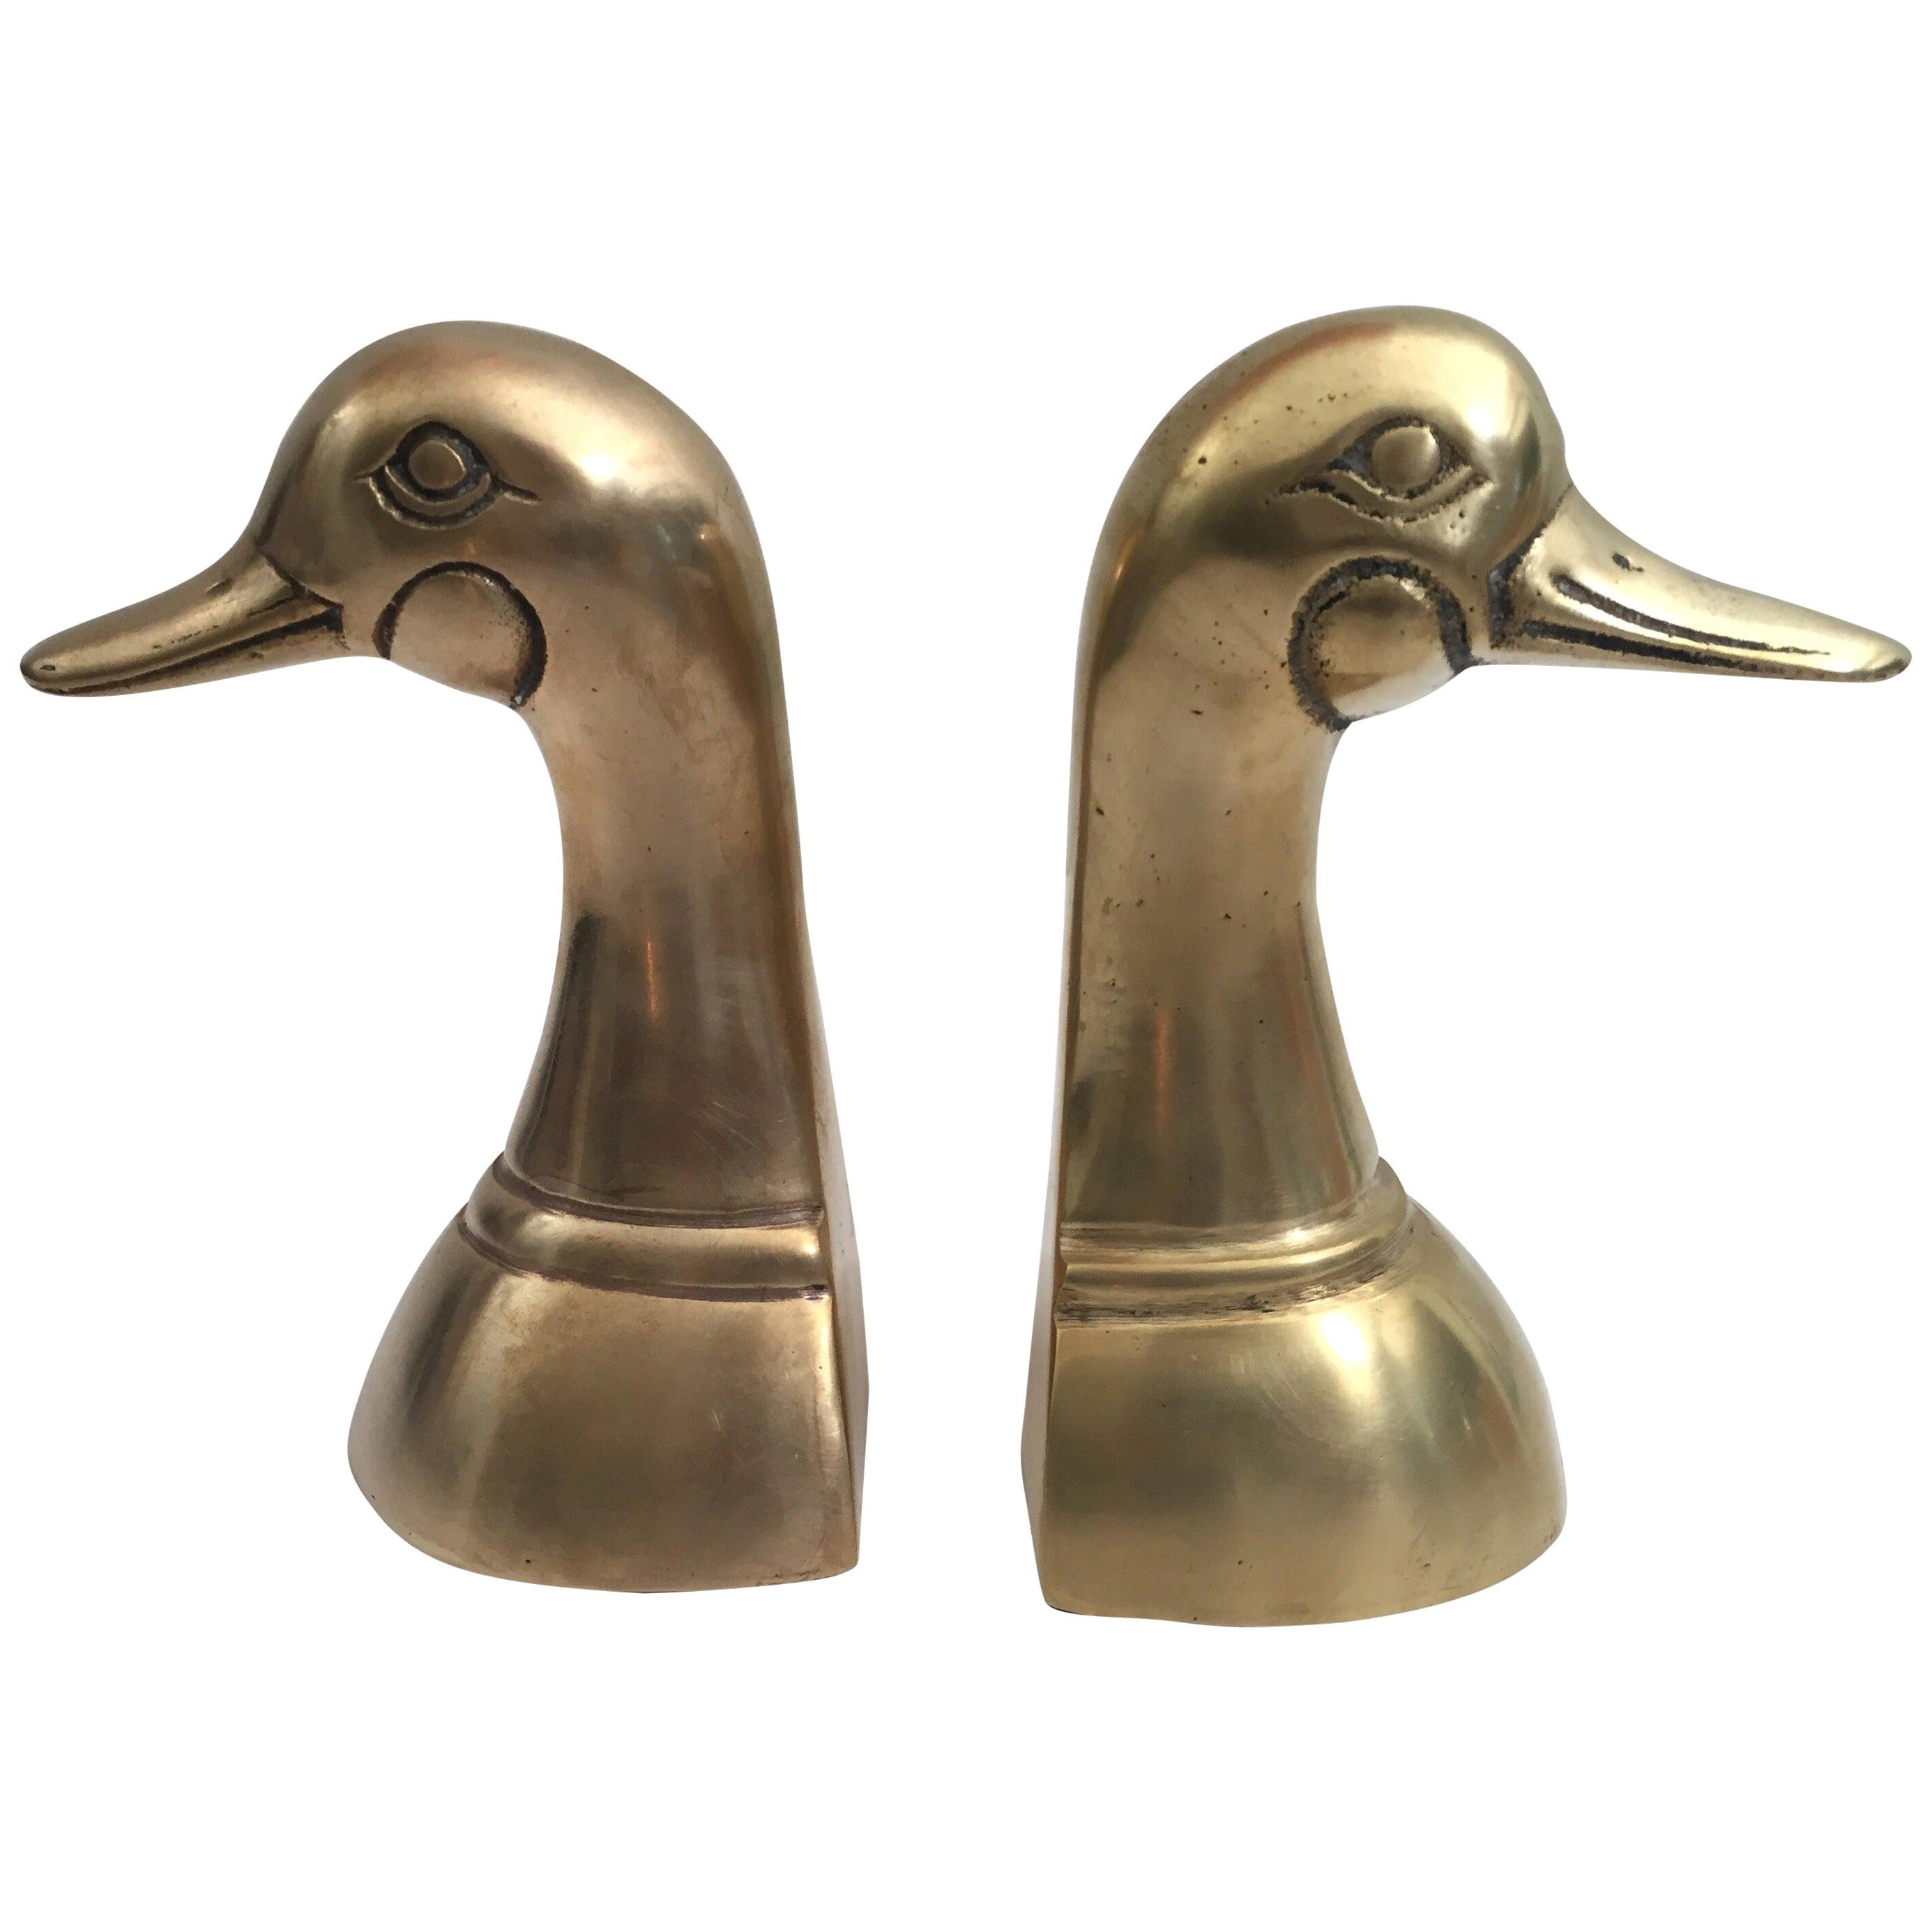 Pair of Vintage Polished Cast Brass Duck Bookends, circa 1950.